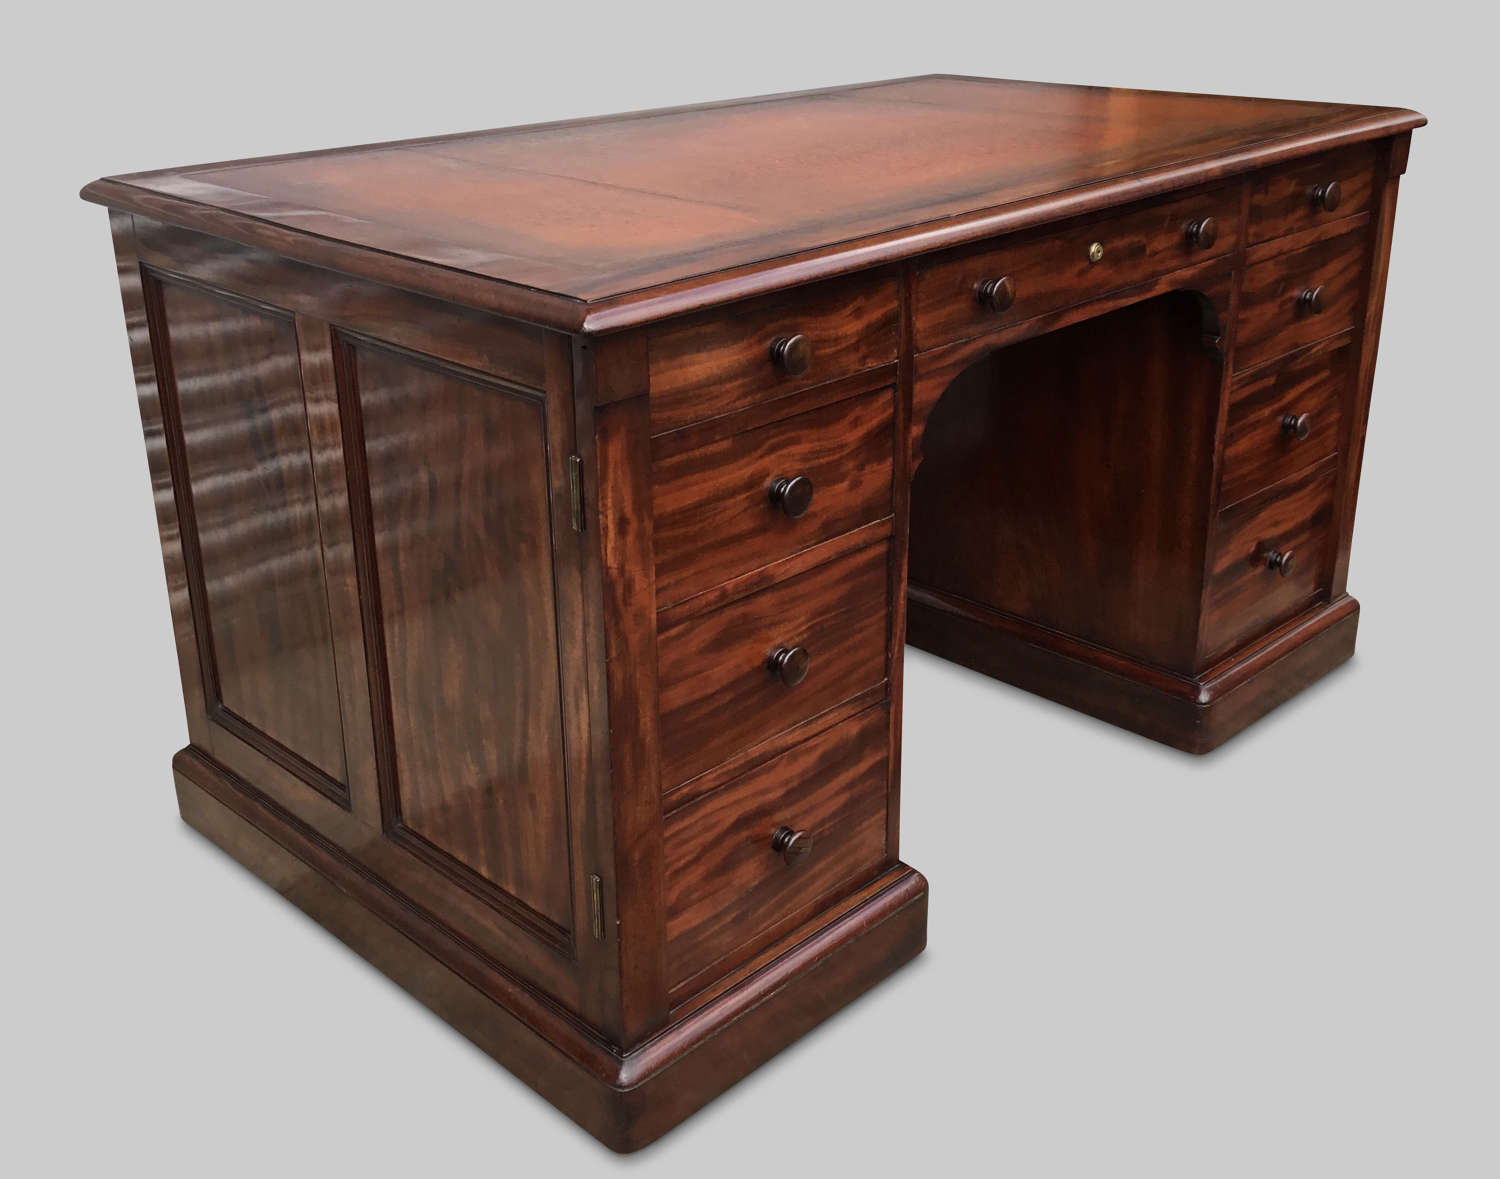 Exceptional late Regency Gillows mahogany pedestal desk